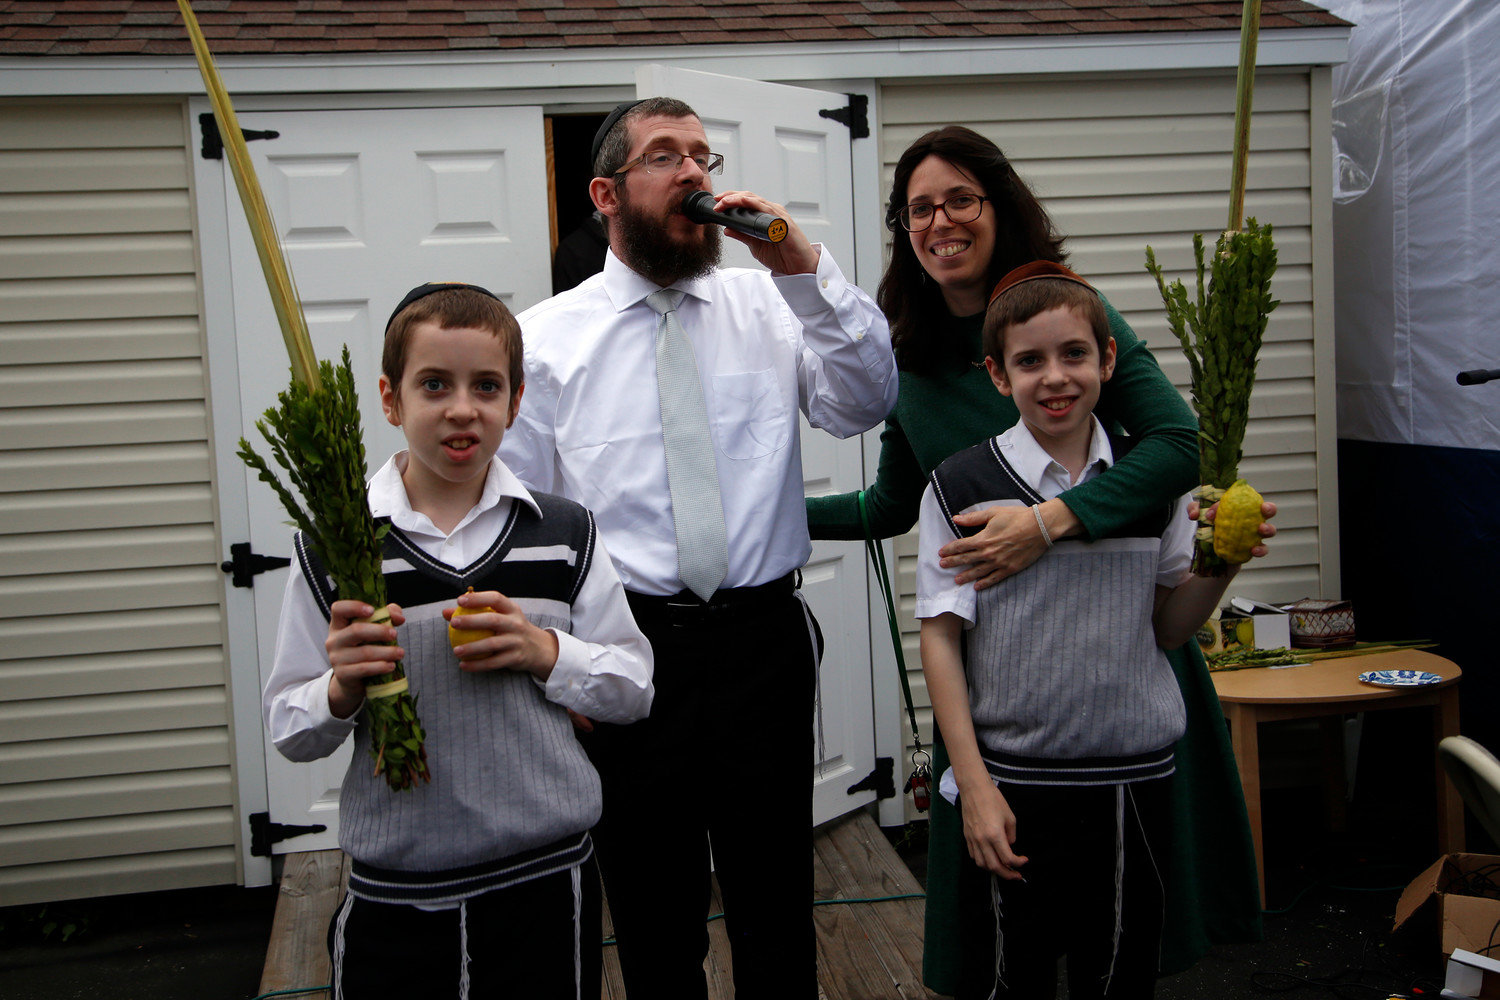 Rabbi Shimon Kramer and Rabbanit Chanie Kramer and two of their sons.